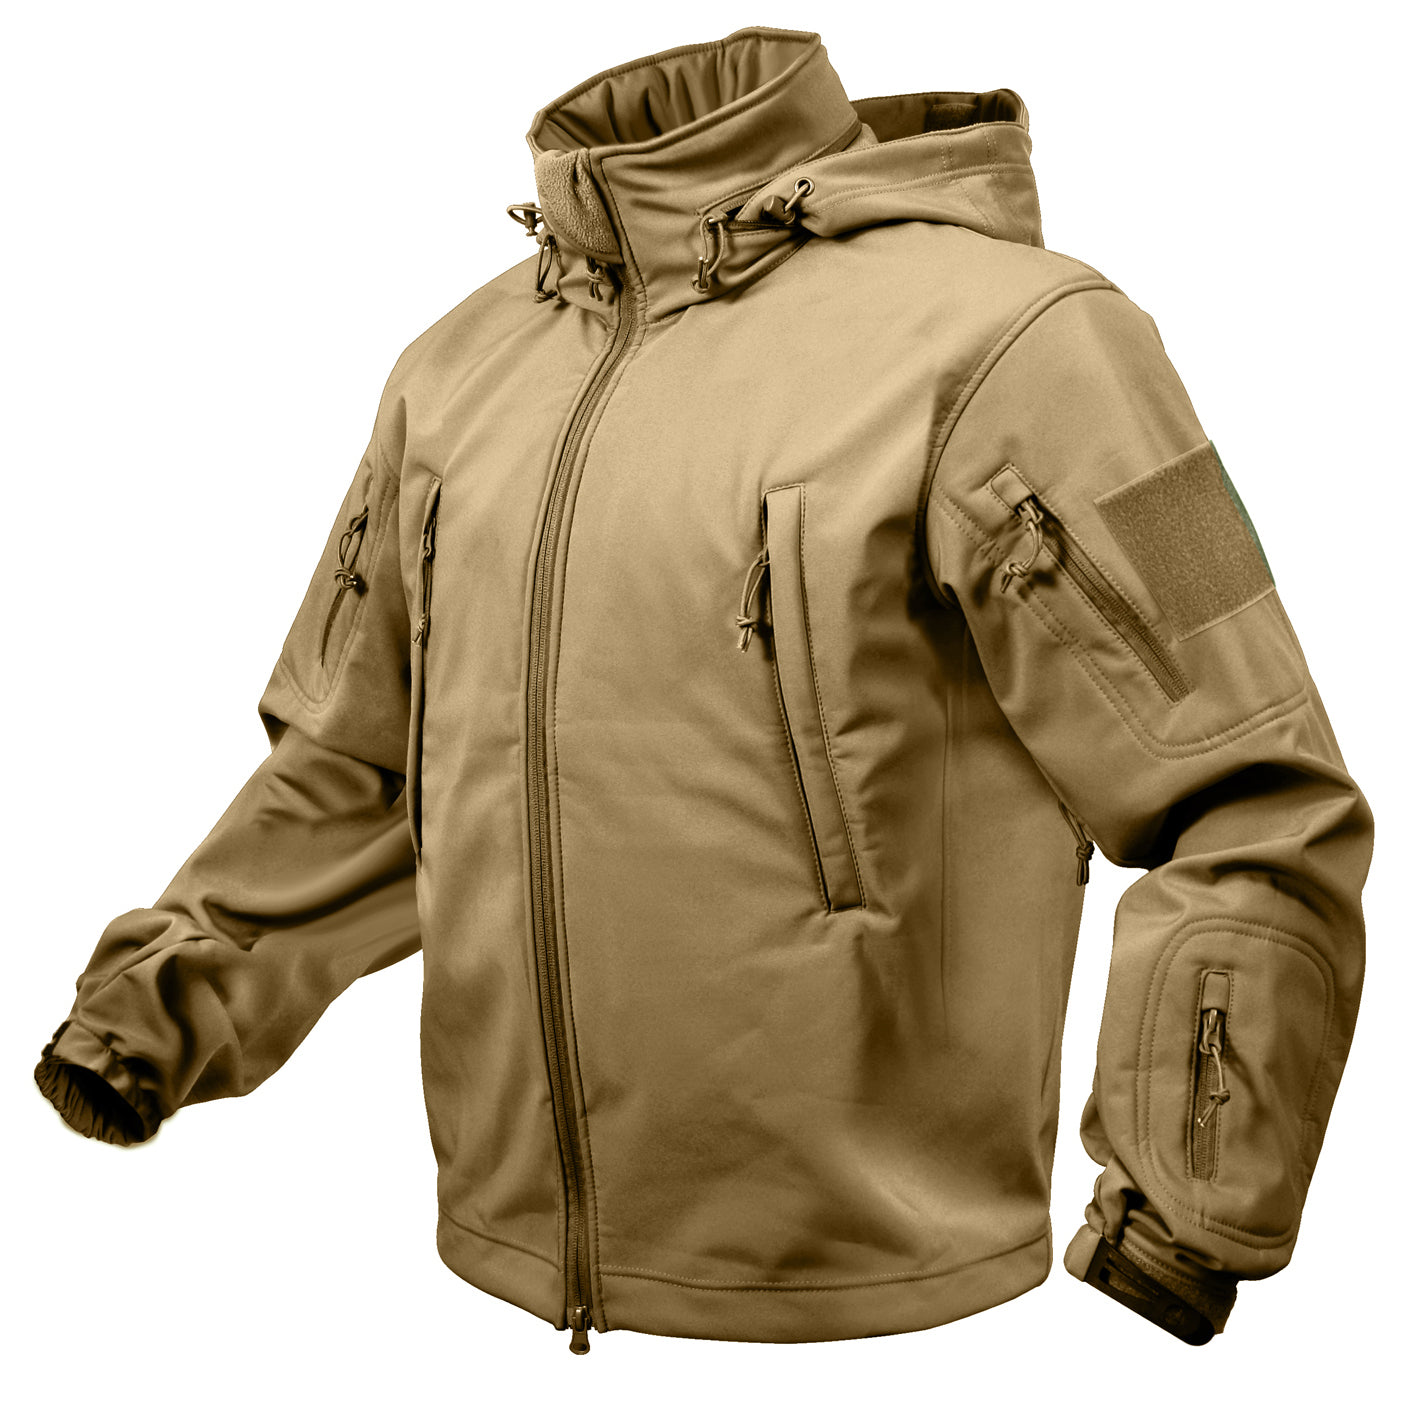 Milspec Special Ops Tactical Soft Shell Jacket Gifts For Him MilTac Tactical Military Outdoor Gear Australia